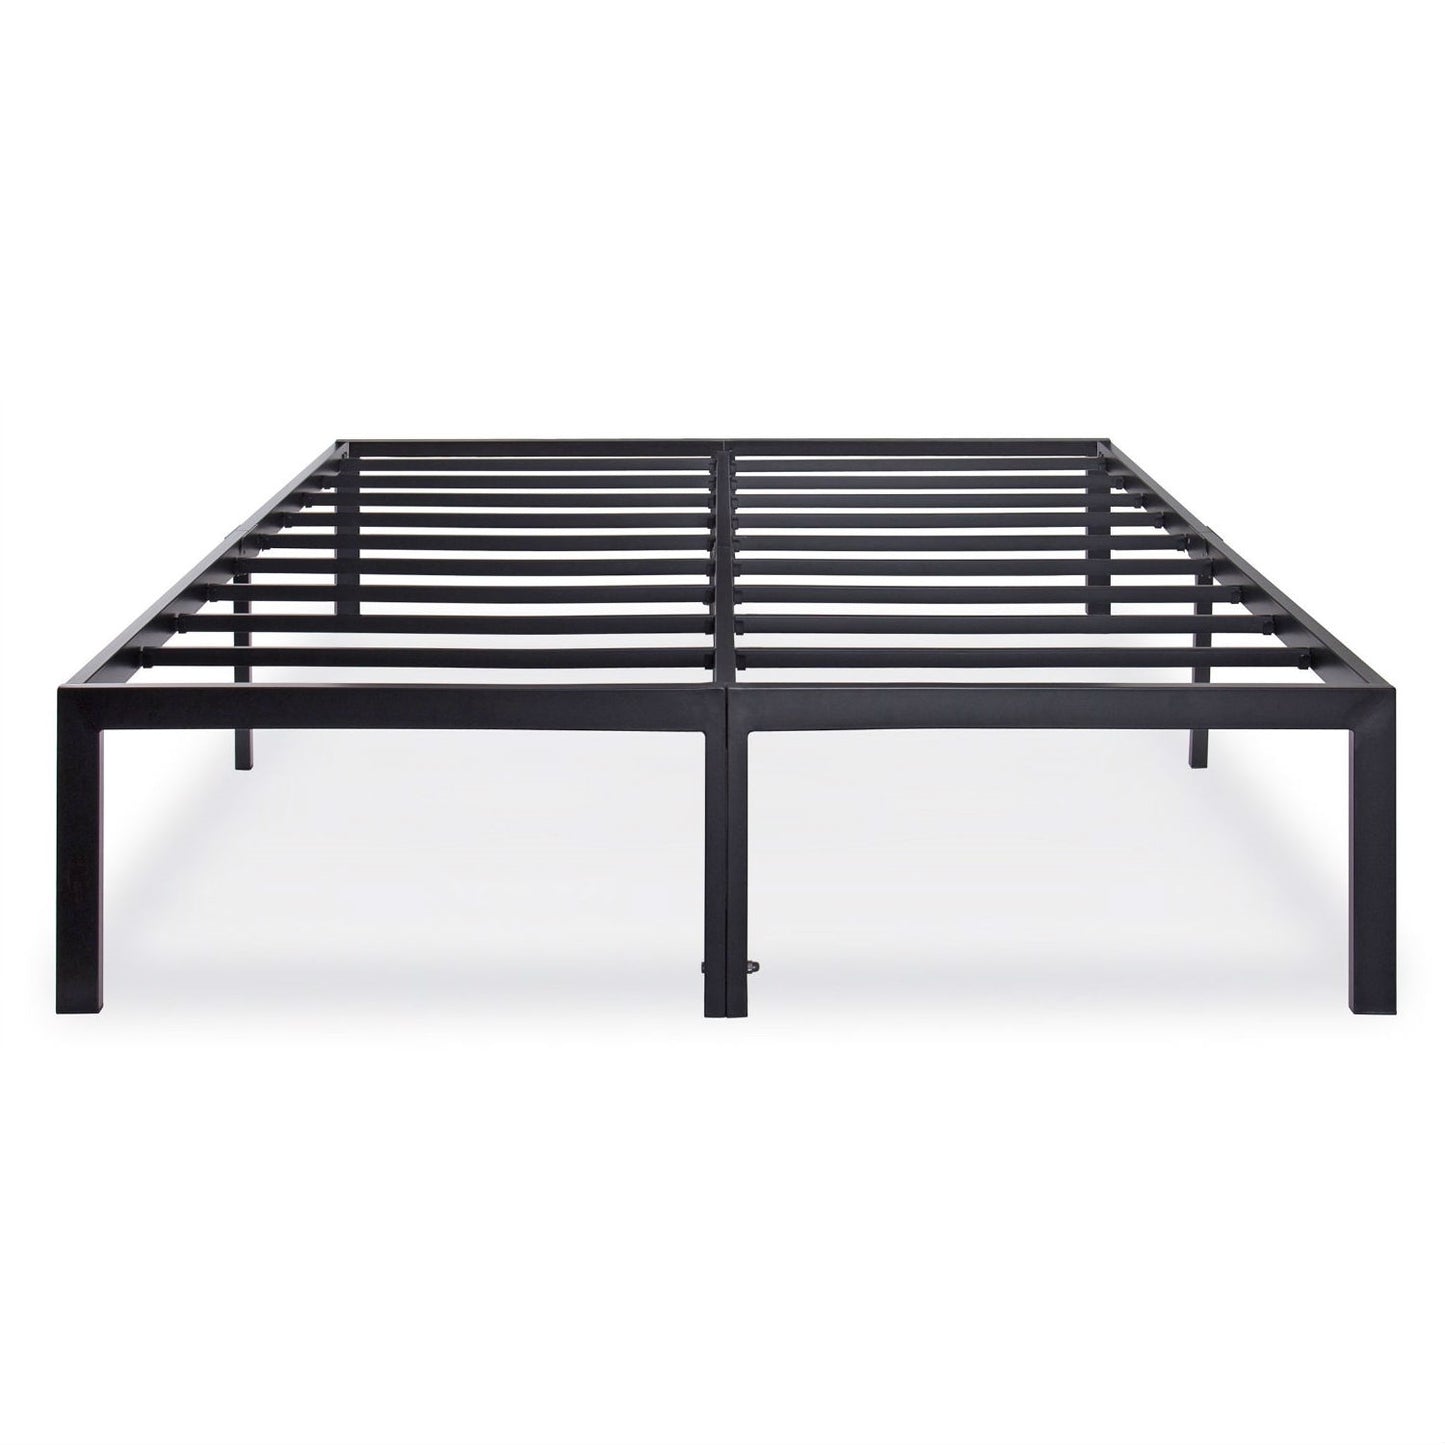 Full size Heavy Duty Metal Platform Bed Frame - 2,000 lb Weight Capacity